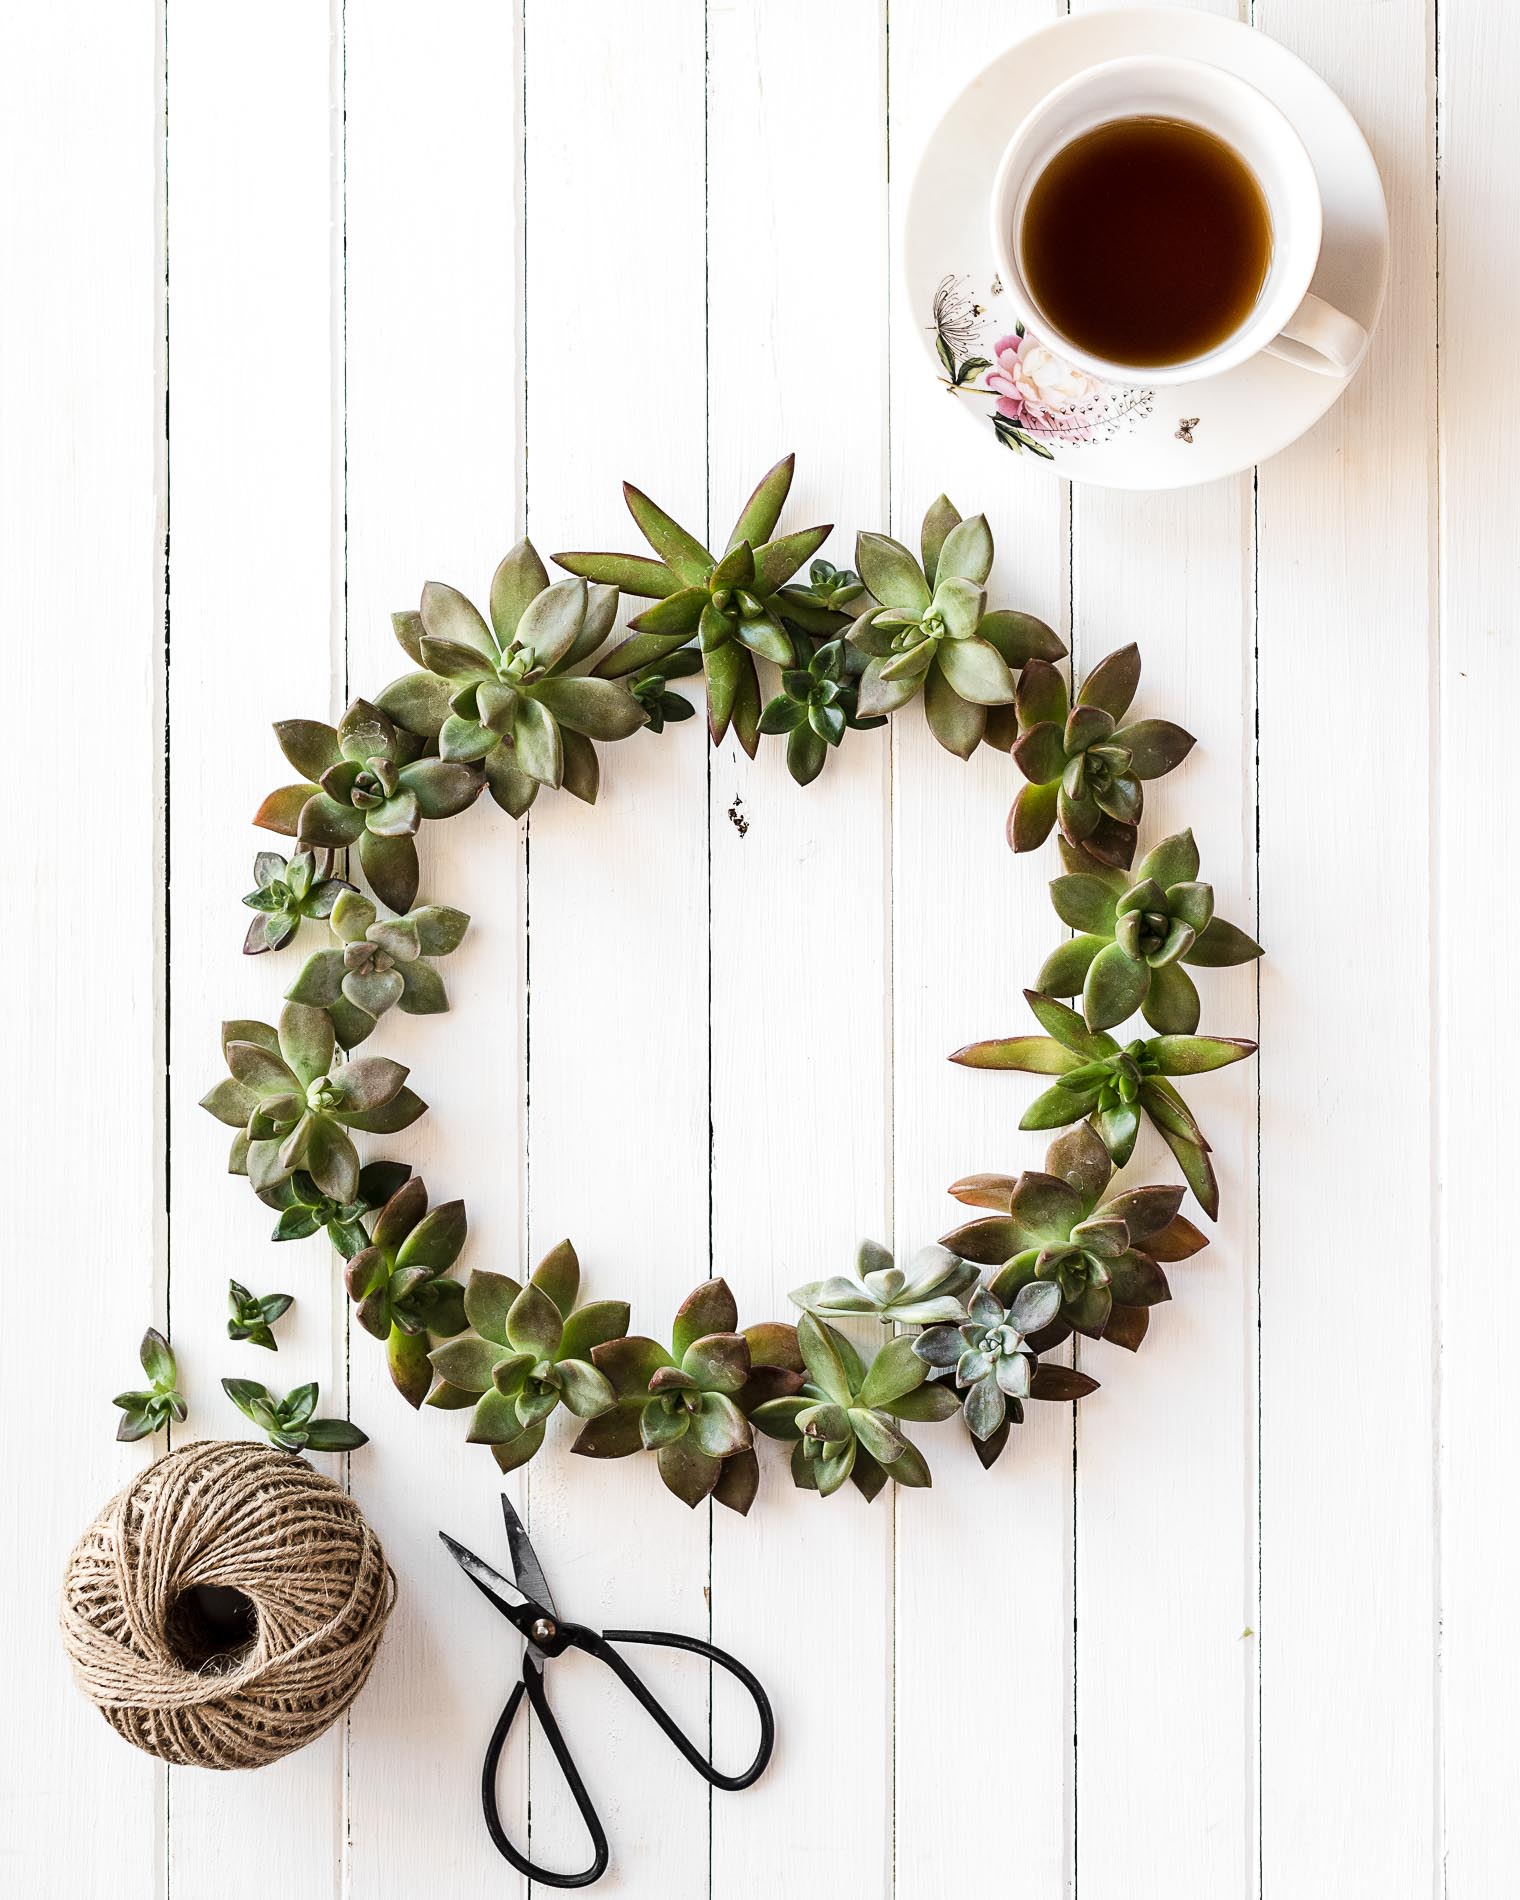 Five Things Friday, Succulent Wreath, Barb Brookbank, Keeping With the Times